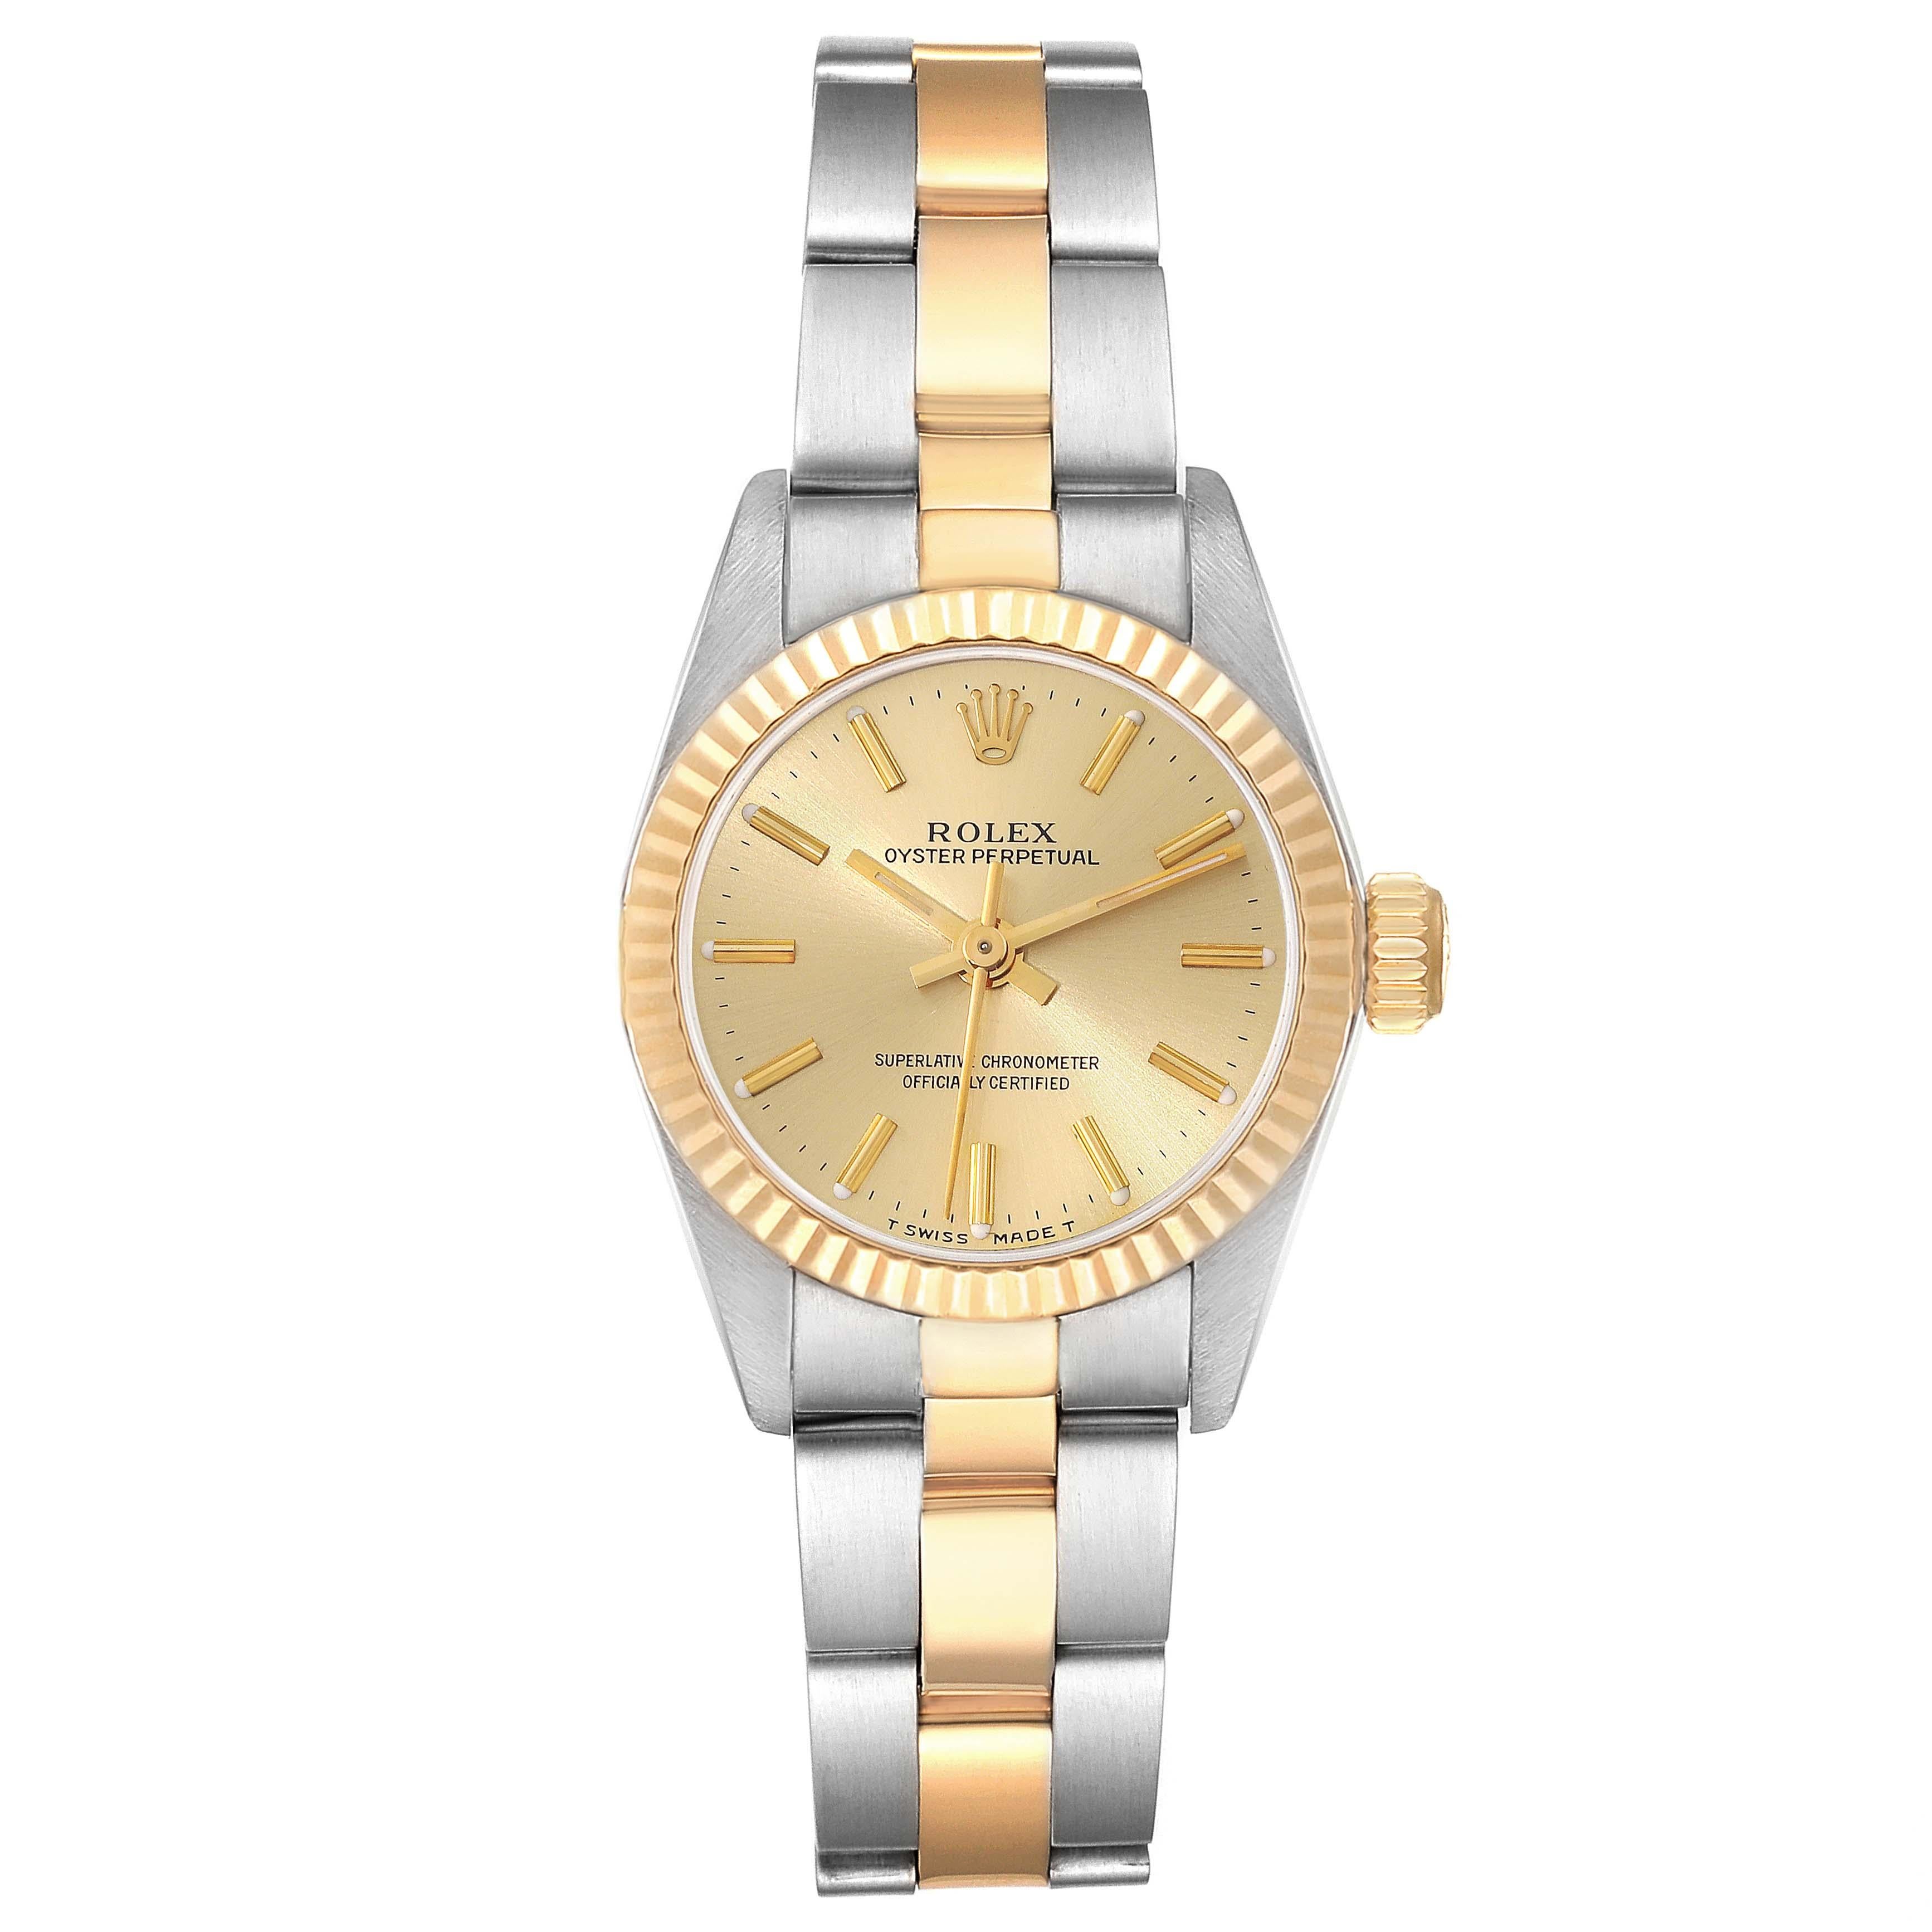 Rolex Oyster Perpetual Steel Yellow Gold Ladies Watch 67193. Officially certified chronometer automatic self-winding movement. Stainless steel oyster case 24.0 mm in diameter. Rolex logo on an 18k yellow gold crown. 18k yellow gold fluted bezel.